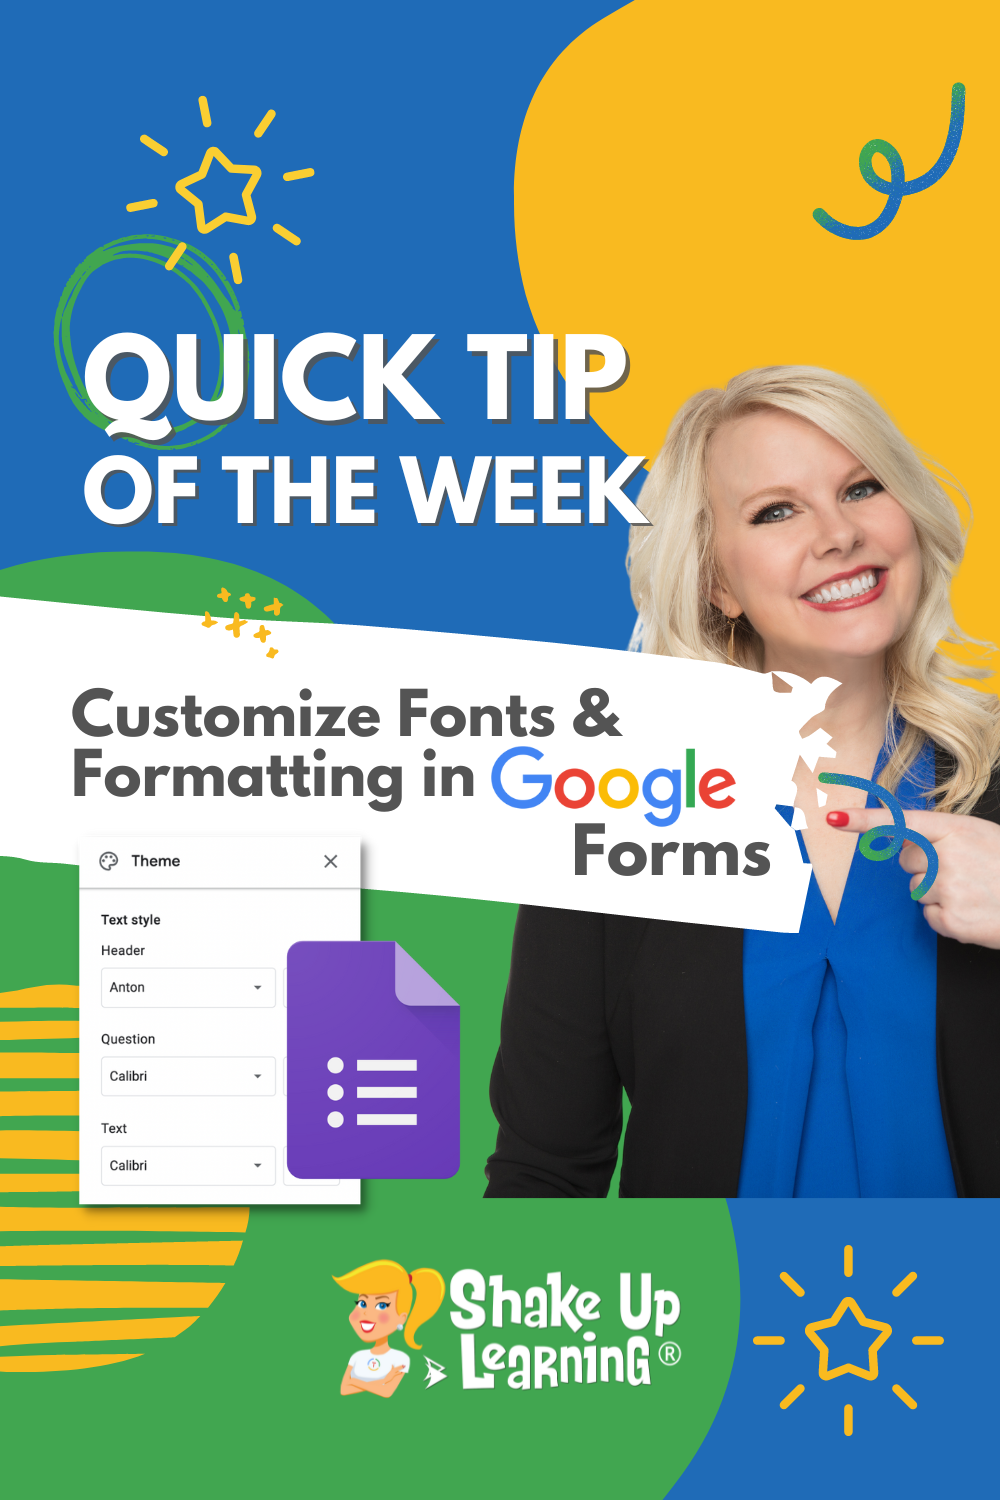 How to Customize Fonts and Formatting in Google
Forms